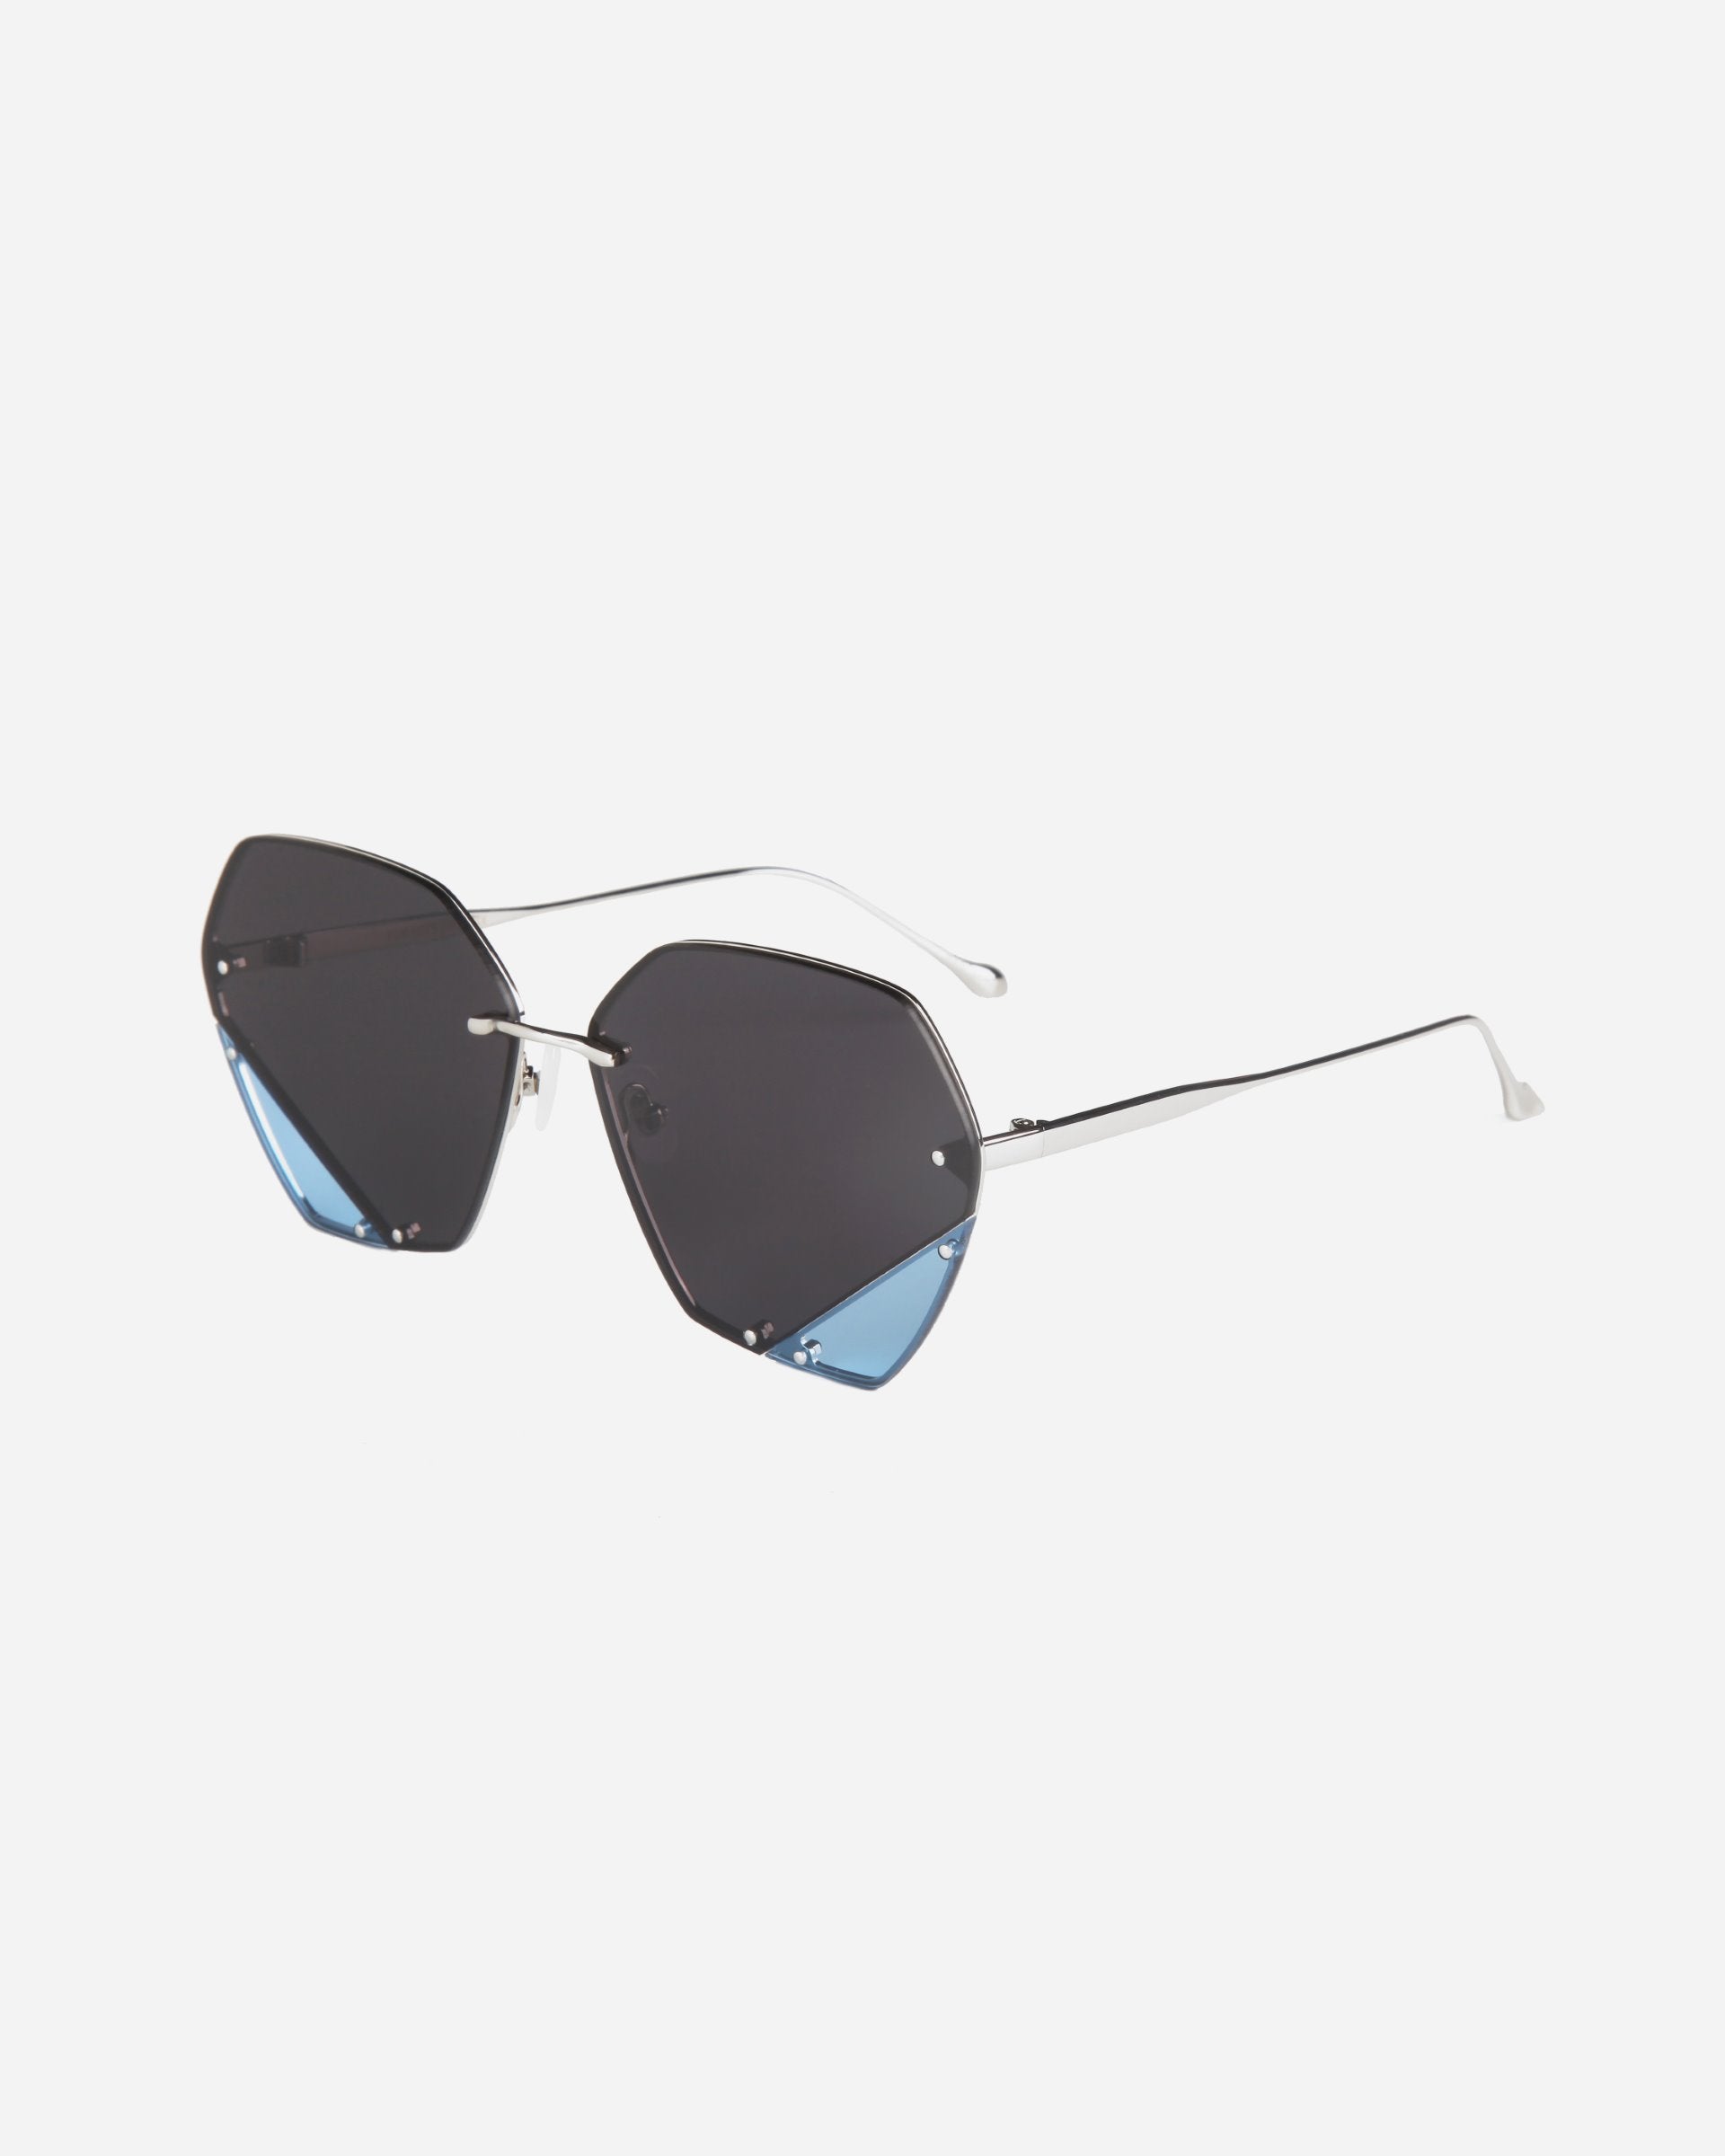 For Art&#39;s Sake® Icy sunglasses with dark lenses and thin silver frames, featuring a unique angular design with slightly pointed corners and geometric lenses. The temples are straight with minimalistic end tips. The lenses offer UV protection and appear dark with a hint of blue at the lower edges.